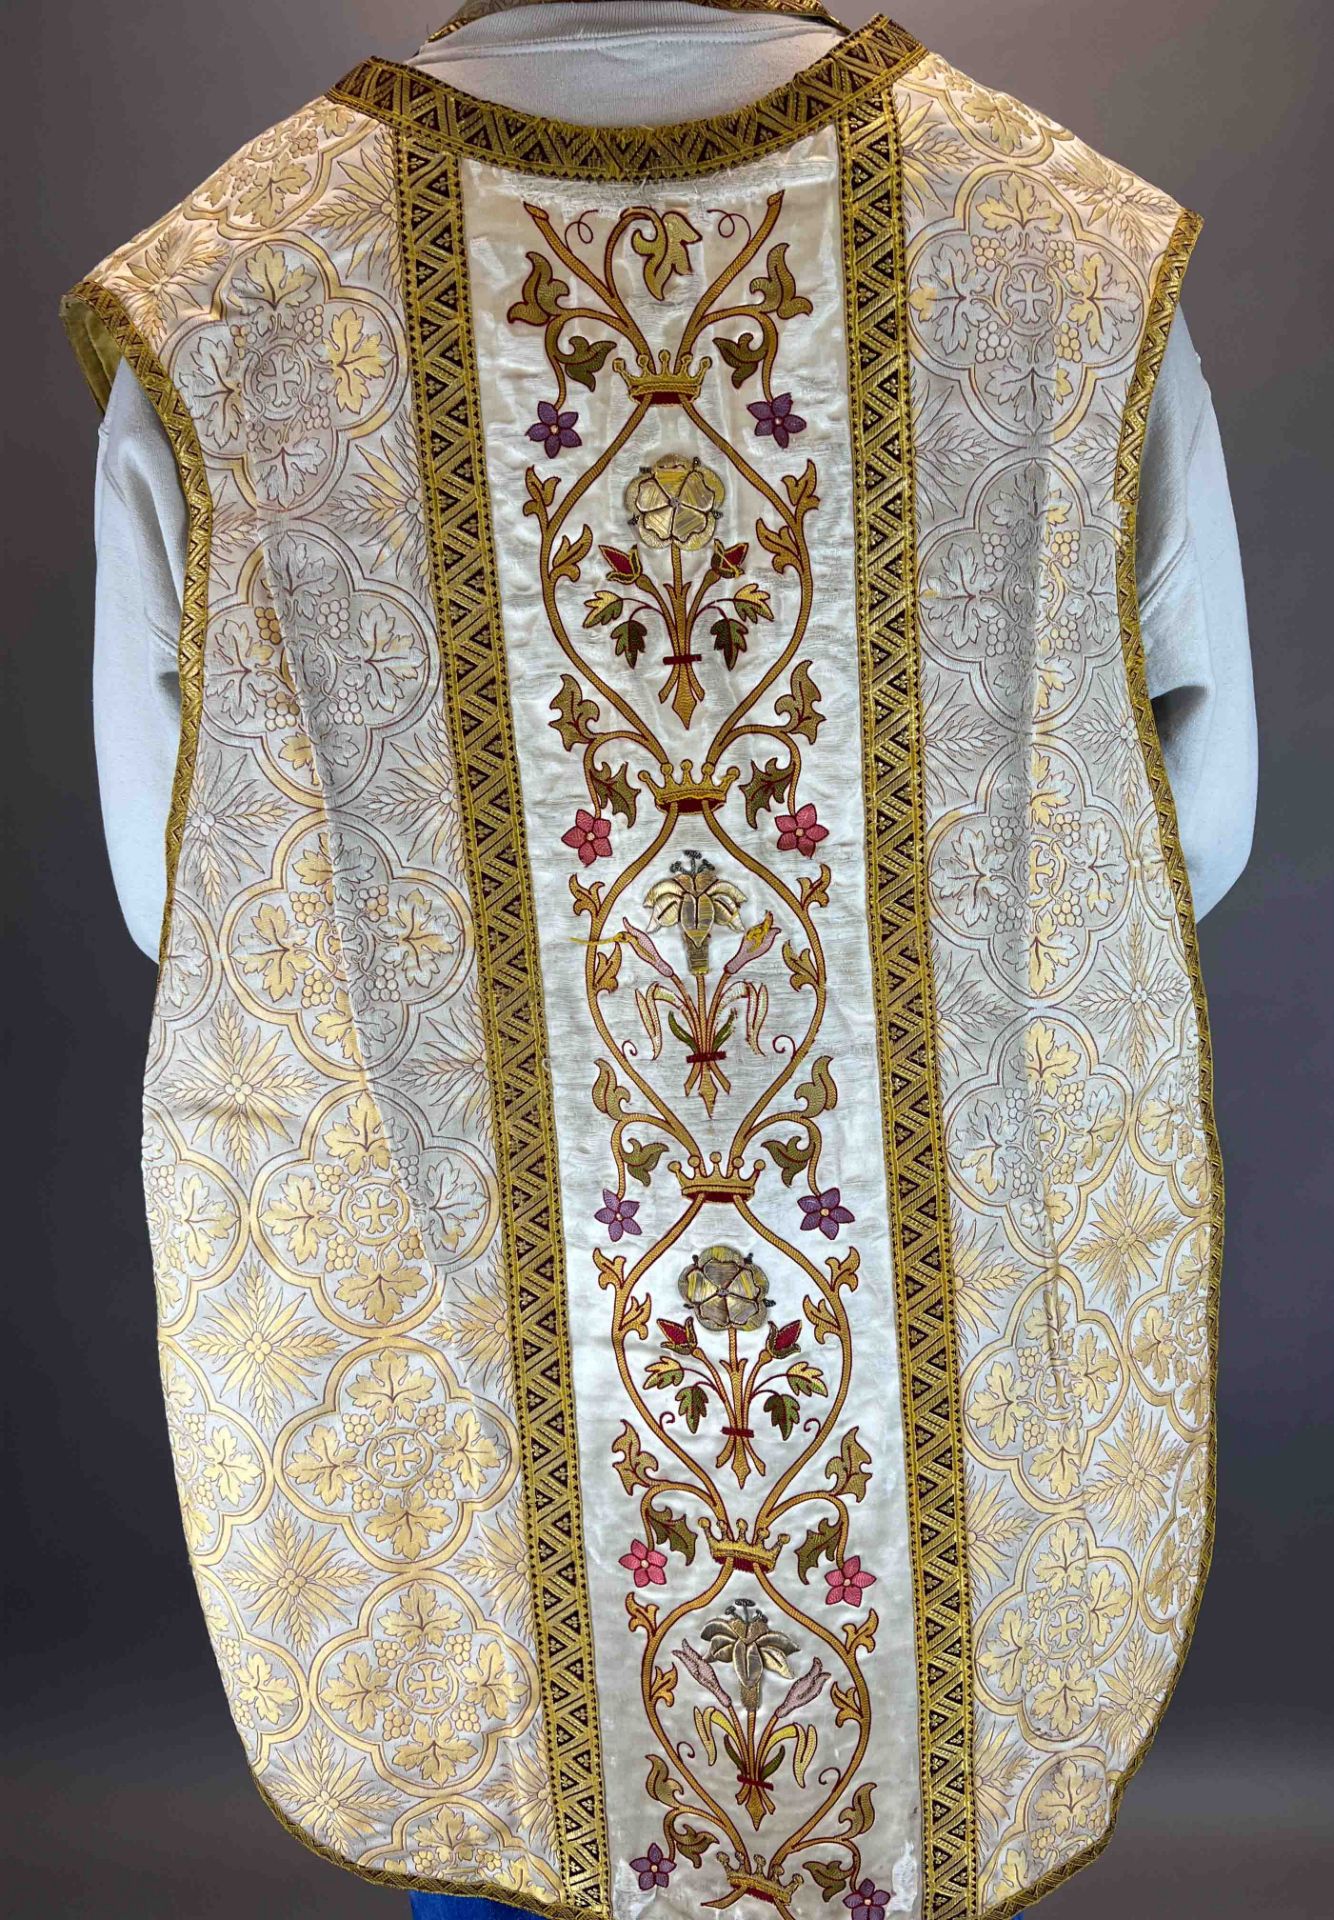 Antique chasuble. Brocade. Gold thread embroidery. Early 20th century. - Image 6 of 12